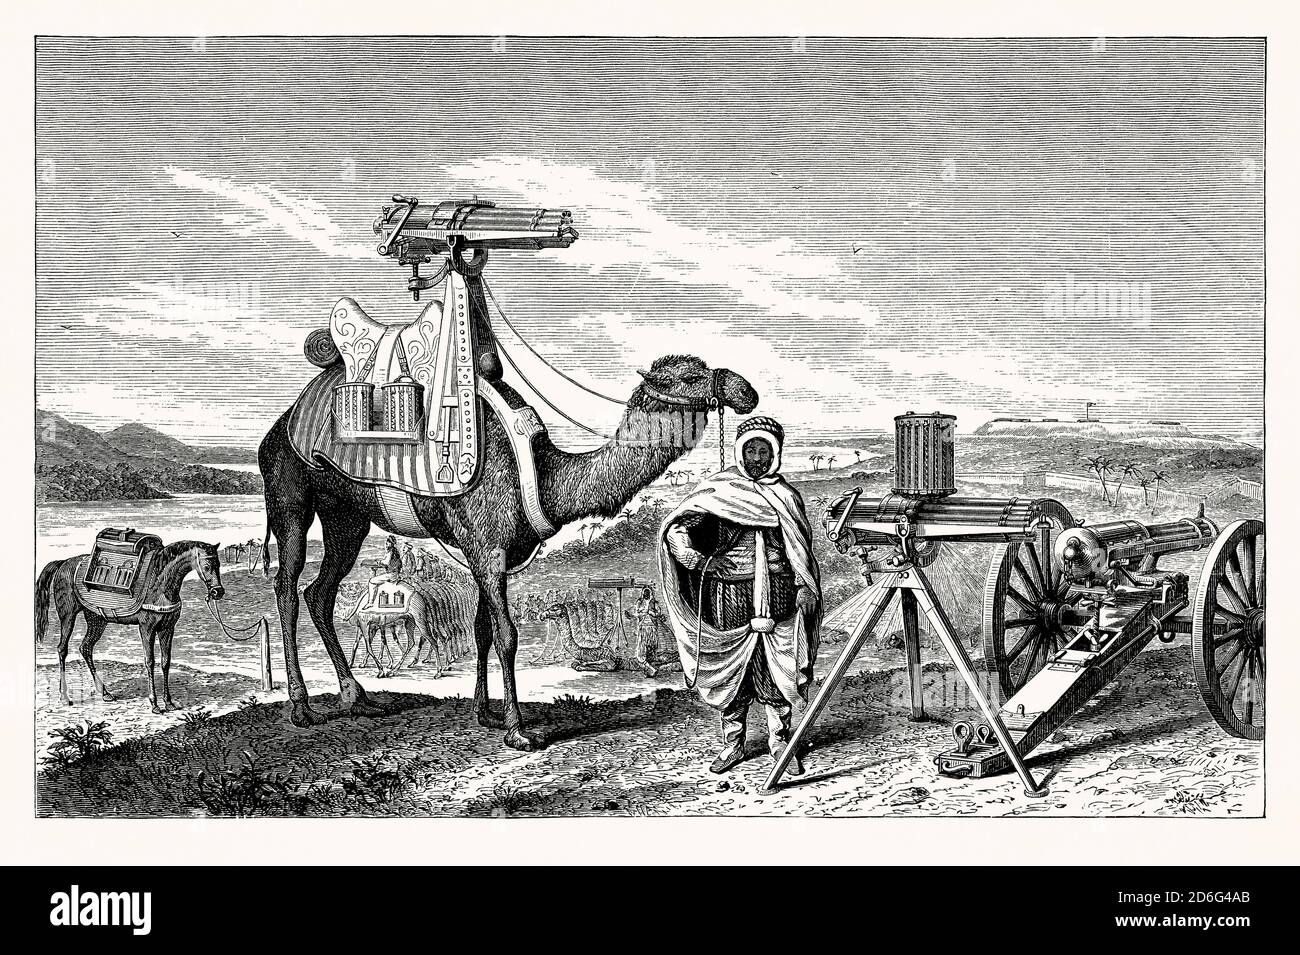 An old engraving showing the use of Gatling guns in service in Egypt. It is from a Victorian mechanical engineering book of the 1880s. The illustration shows one gun mounted on the back of a camel. The Gatling gun is a rapid-fire weapon invented in 1861 by American Richard Jordan Gatling and a forerunner of the modern machine gun. One of the best-known early rapid-fire firearms, the Gatling gun first saw combat use in the American Civil War. The Gatling gun's operation centred on a hand-cranked, rotating multi-barrel design. It allowed rapid rates of fire without the barrels overheating. Stock Photo